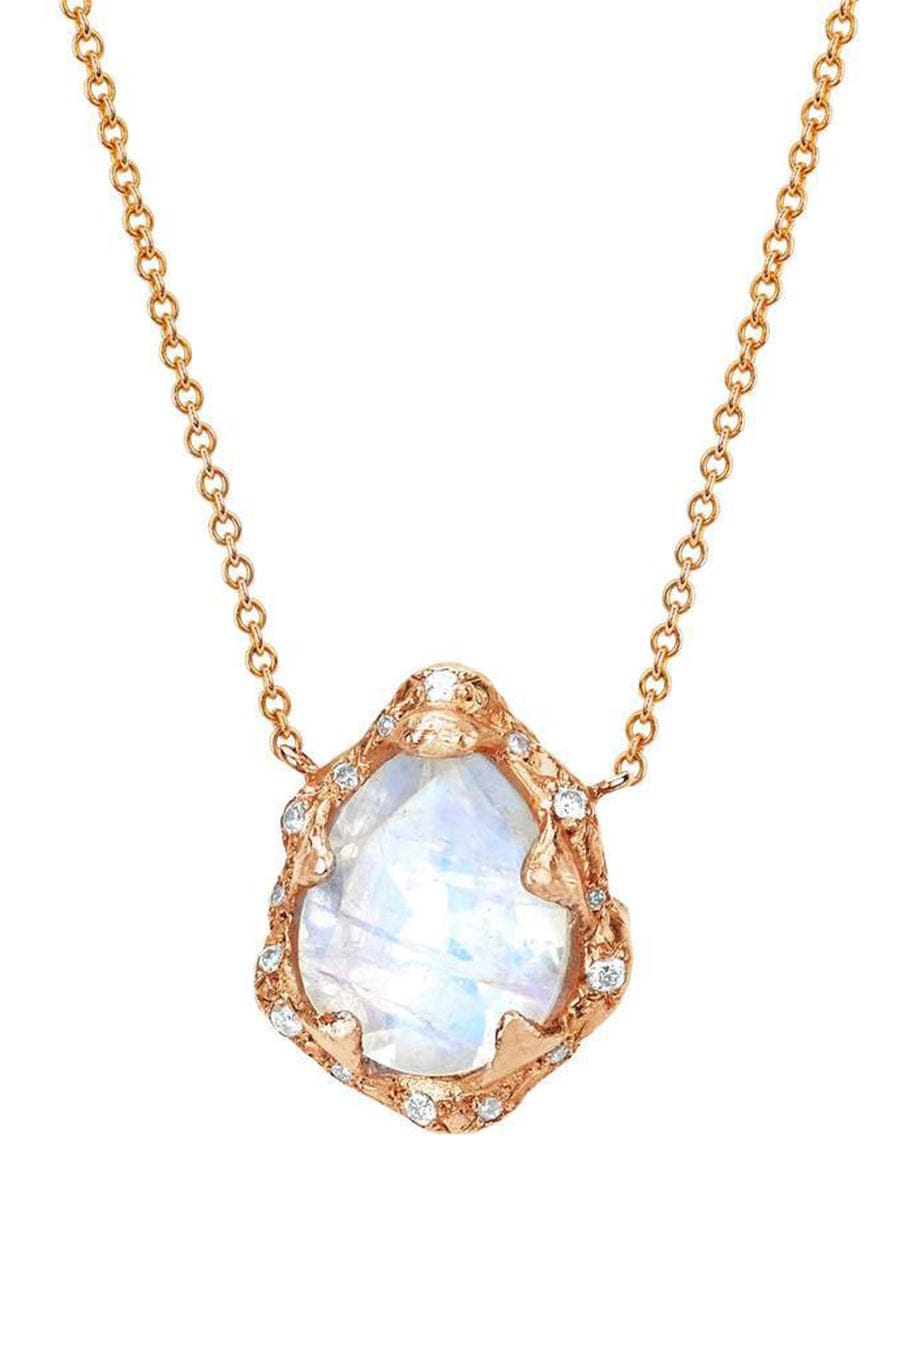 Baby Queen Water Drop Moonstone Necklace with Sprinkled Diamonds JEWELRYFINE JEWELNECKLACE O LOGAN HOLLOWELL   